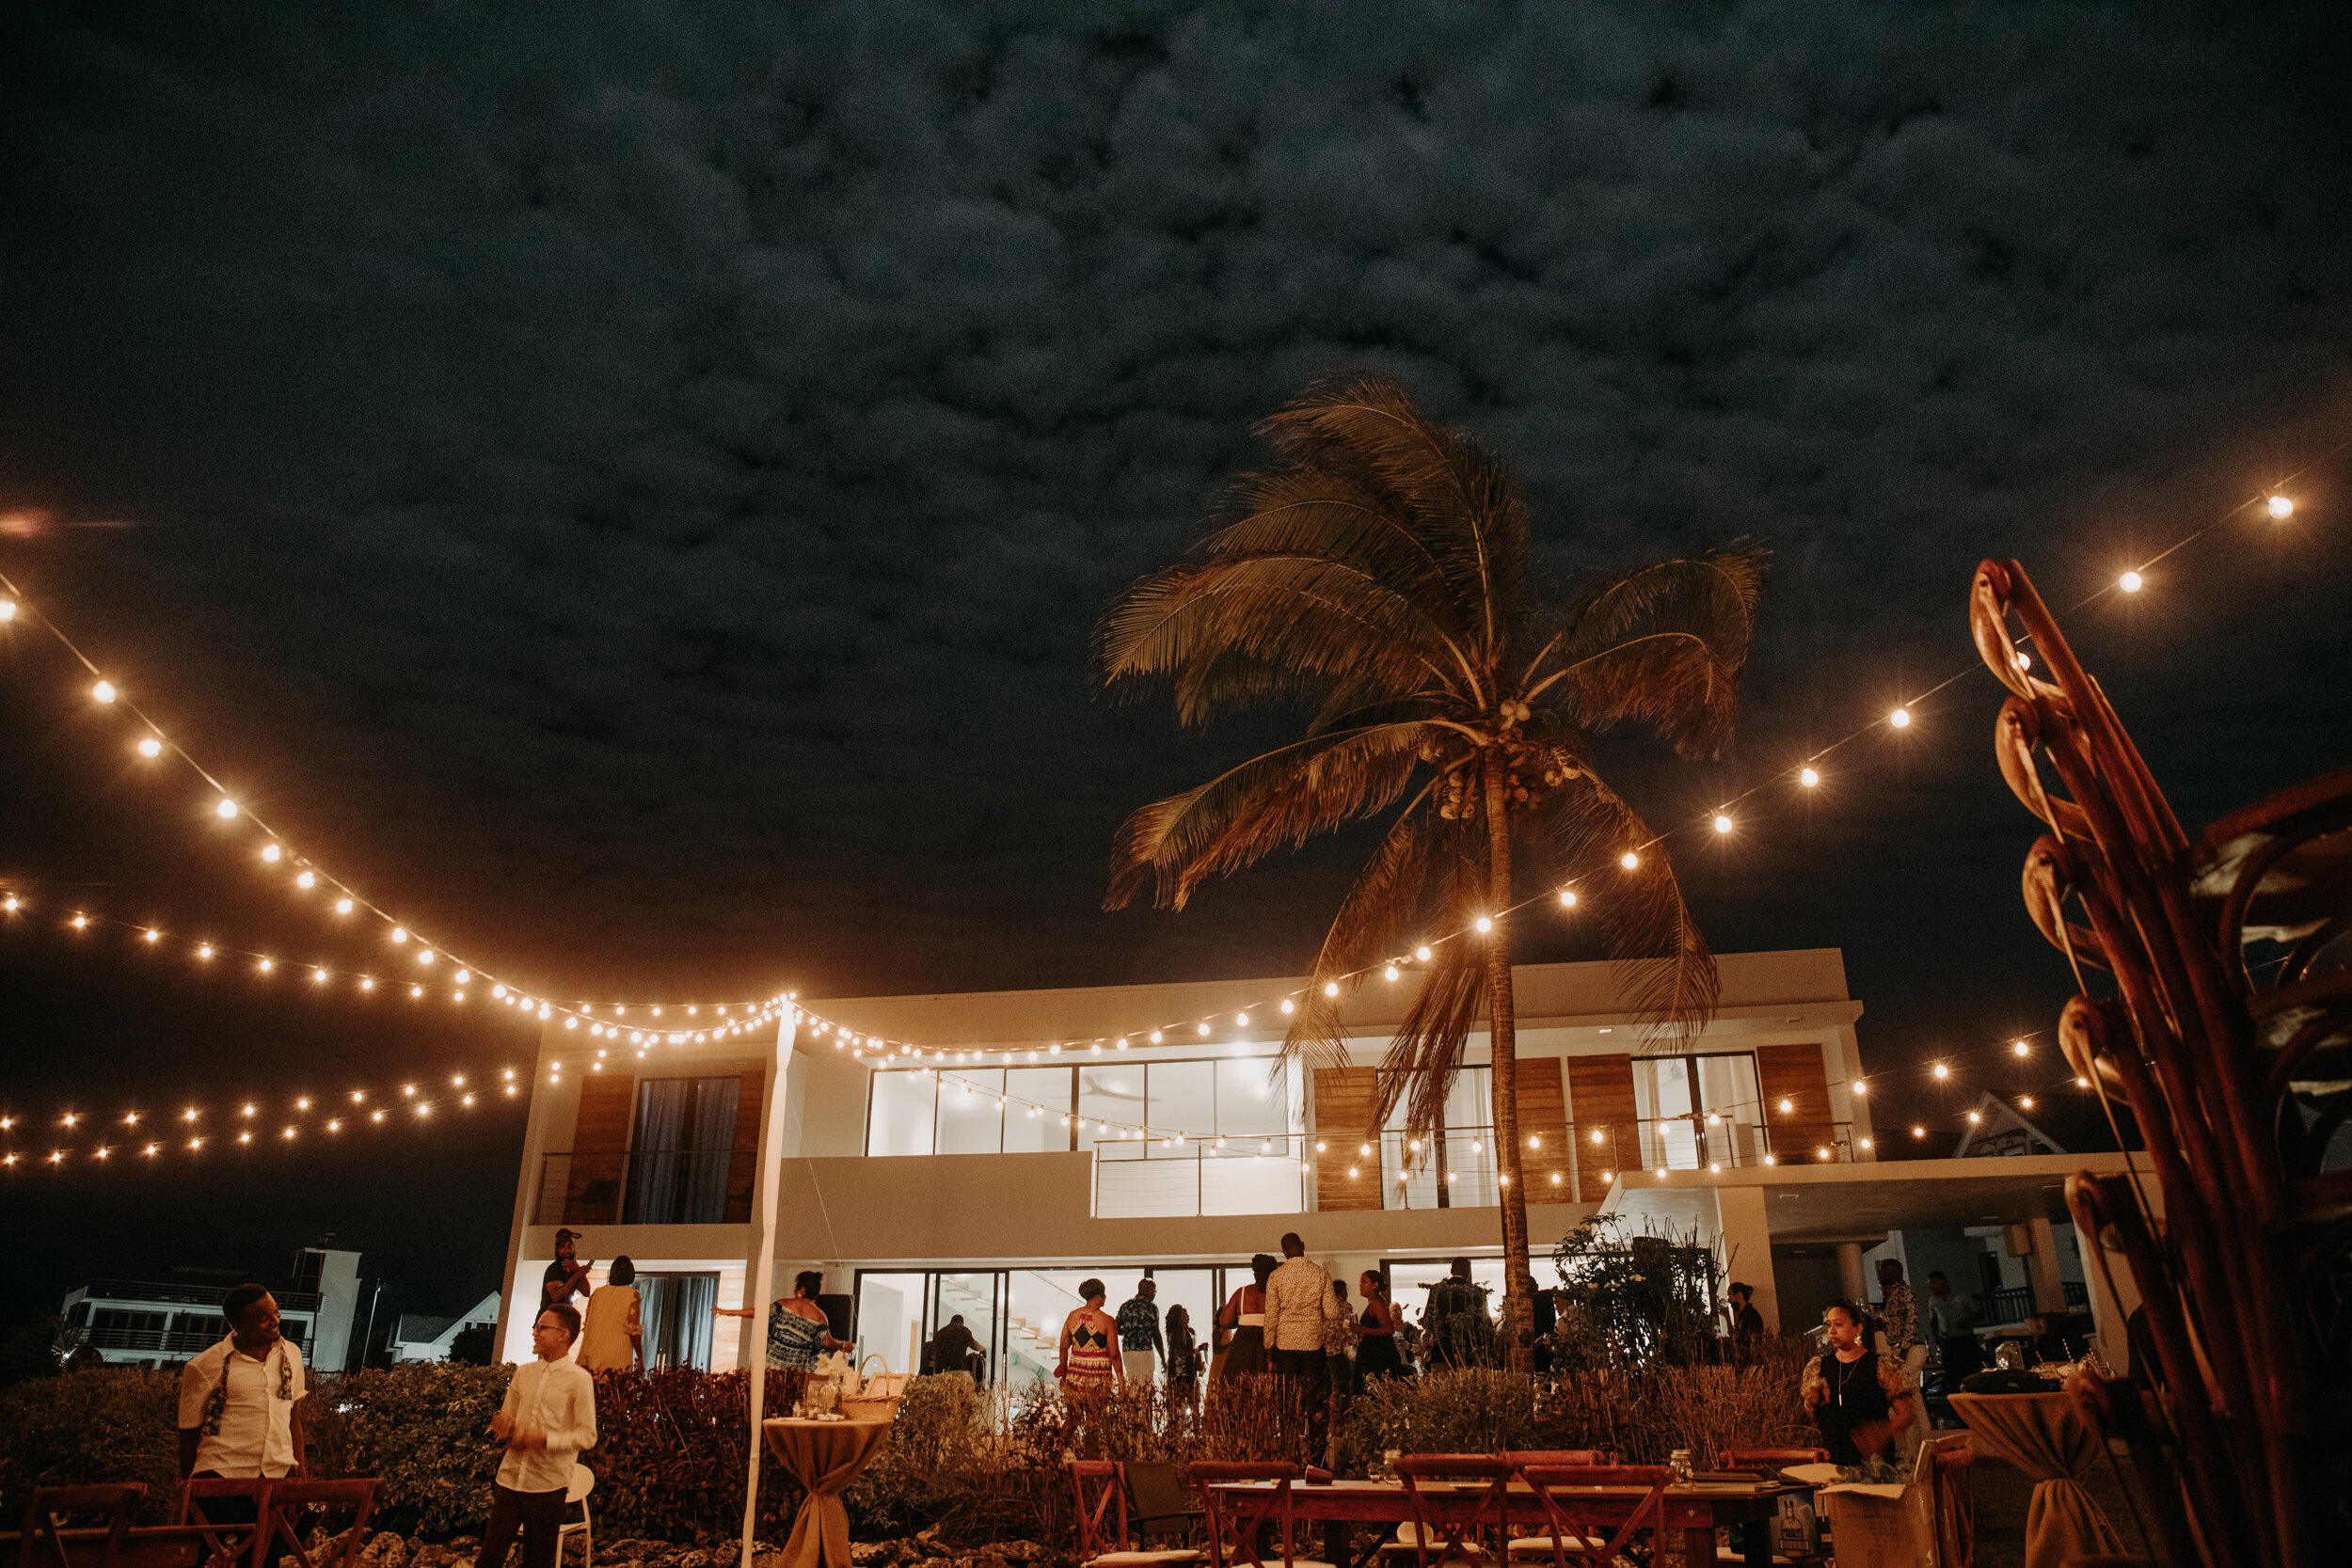 bright string lights shine against the dark cloudy night sky as wedding guests mingle